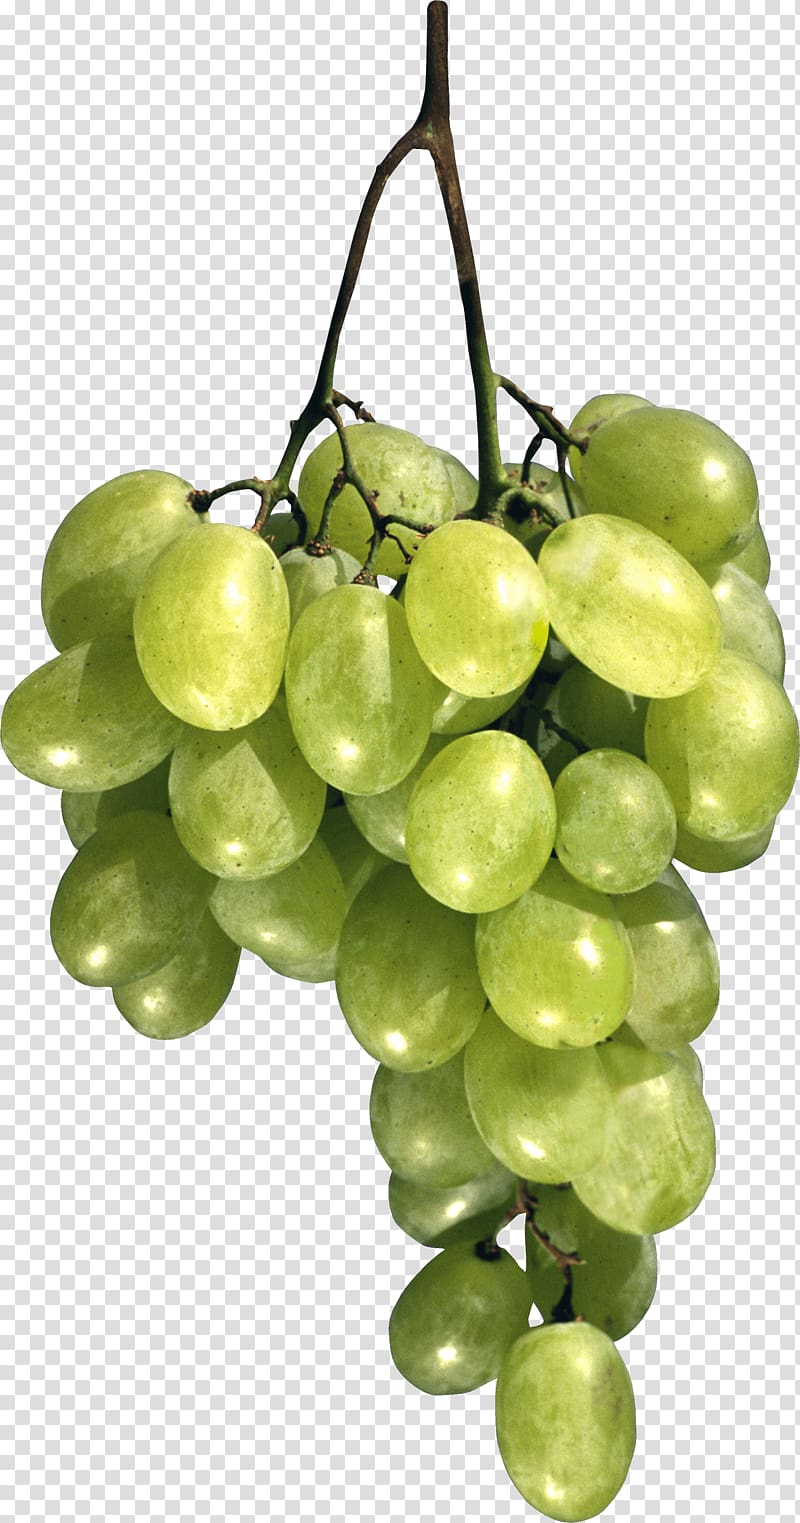 Common Grape Vine Moscow Cafe Breakfast, Green Grape transparent background PNG clipart